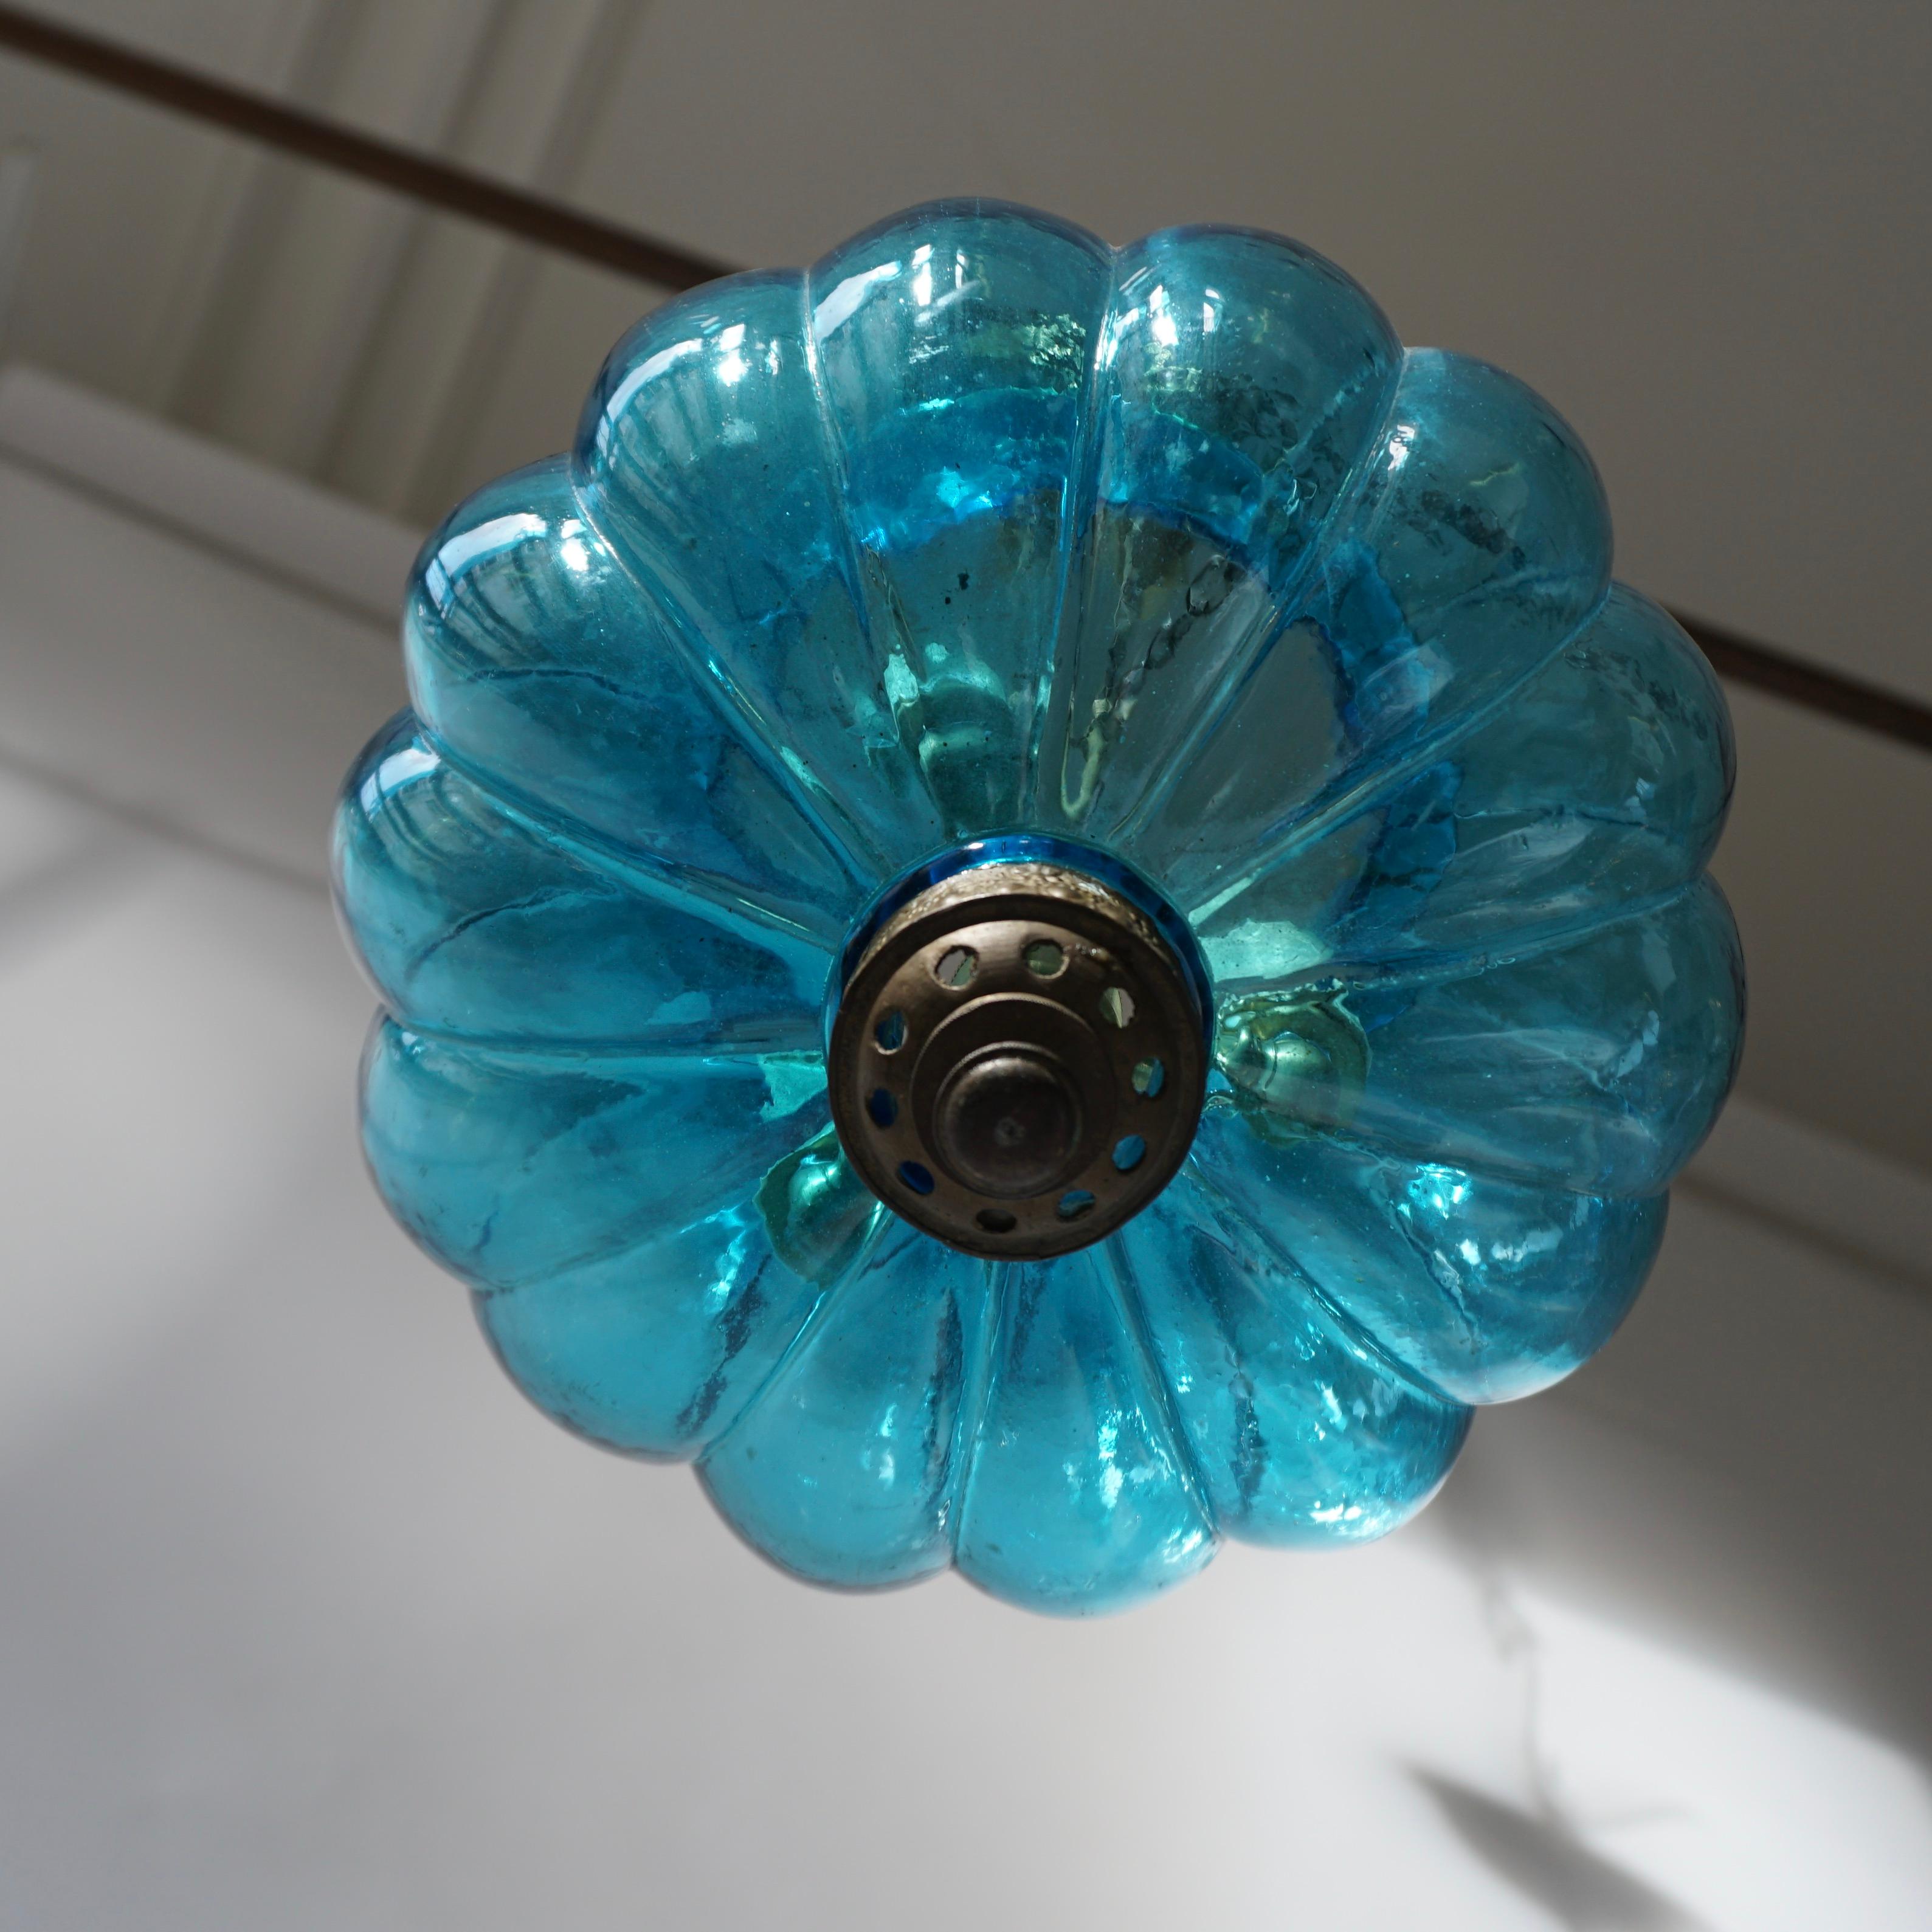 Blue crystal pendant created by De Grelle Val St. Lambert in 1950 Belgium.
Measures: Diameter 23 cm.
Total height including the chain and canopy 100 cm.